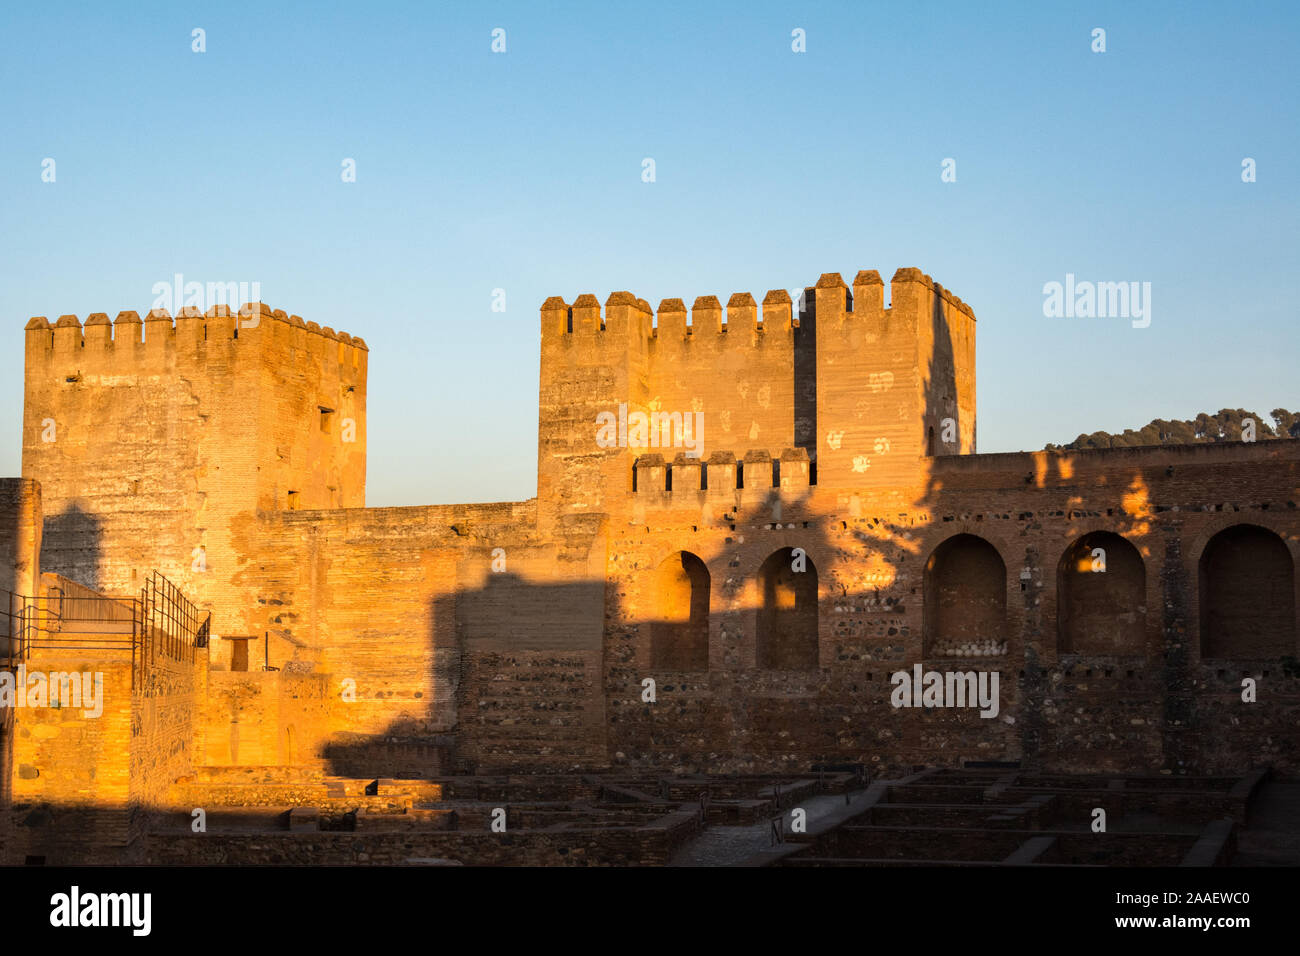 Turrets of the Alcazaba, the fortress of the Alhambra palace complex photographed in the golden hour. A portion of Arms Square is visible. Stock Photo